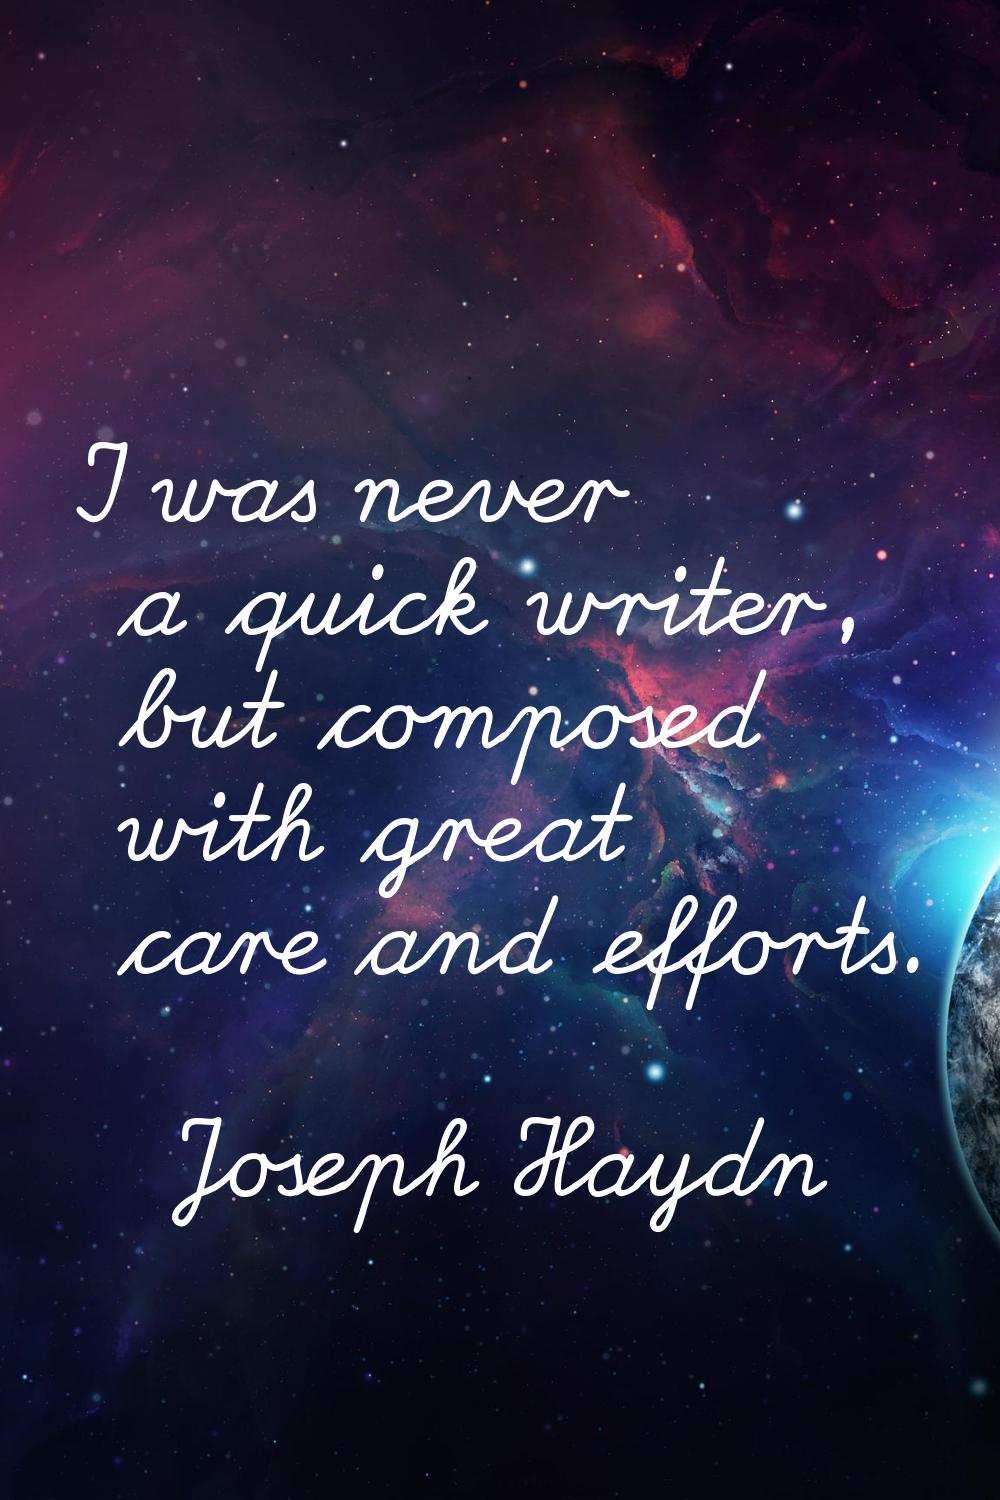 I was never a quick writer, but composed with great care and efforts.